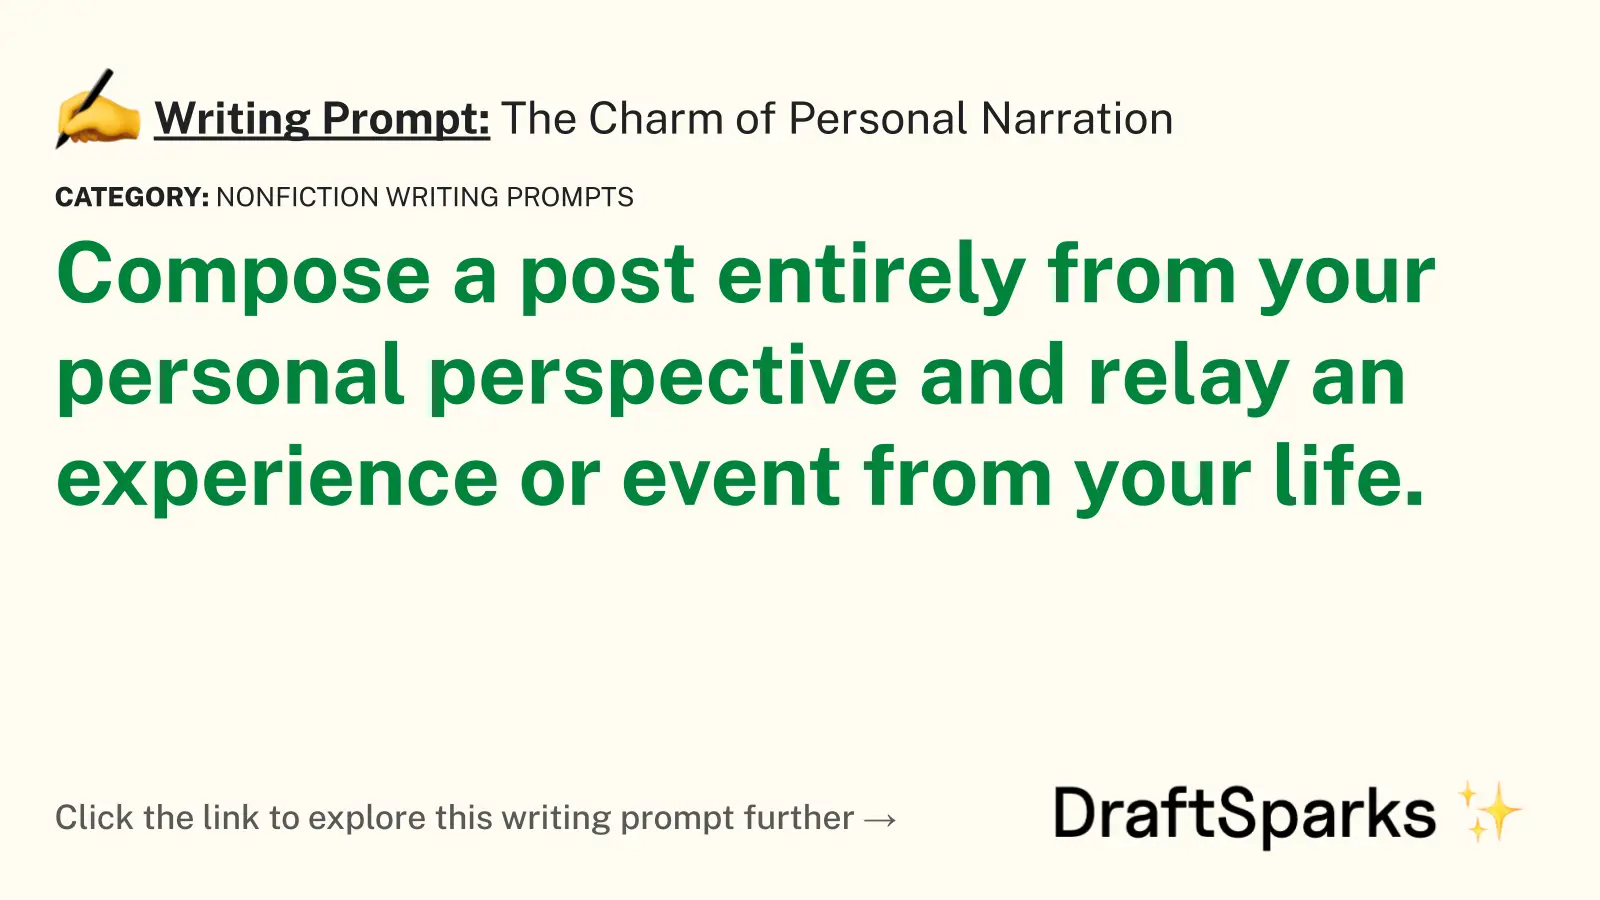 The Charm of Personal Narration